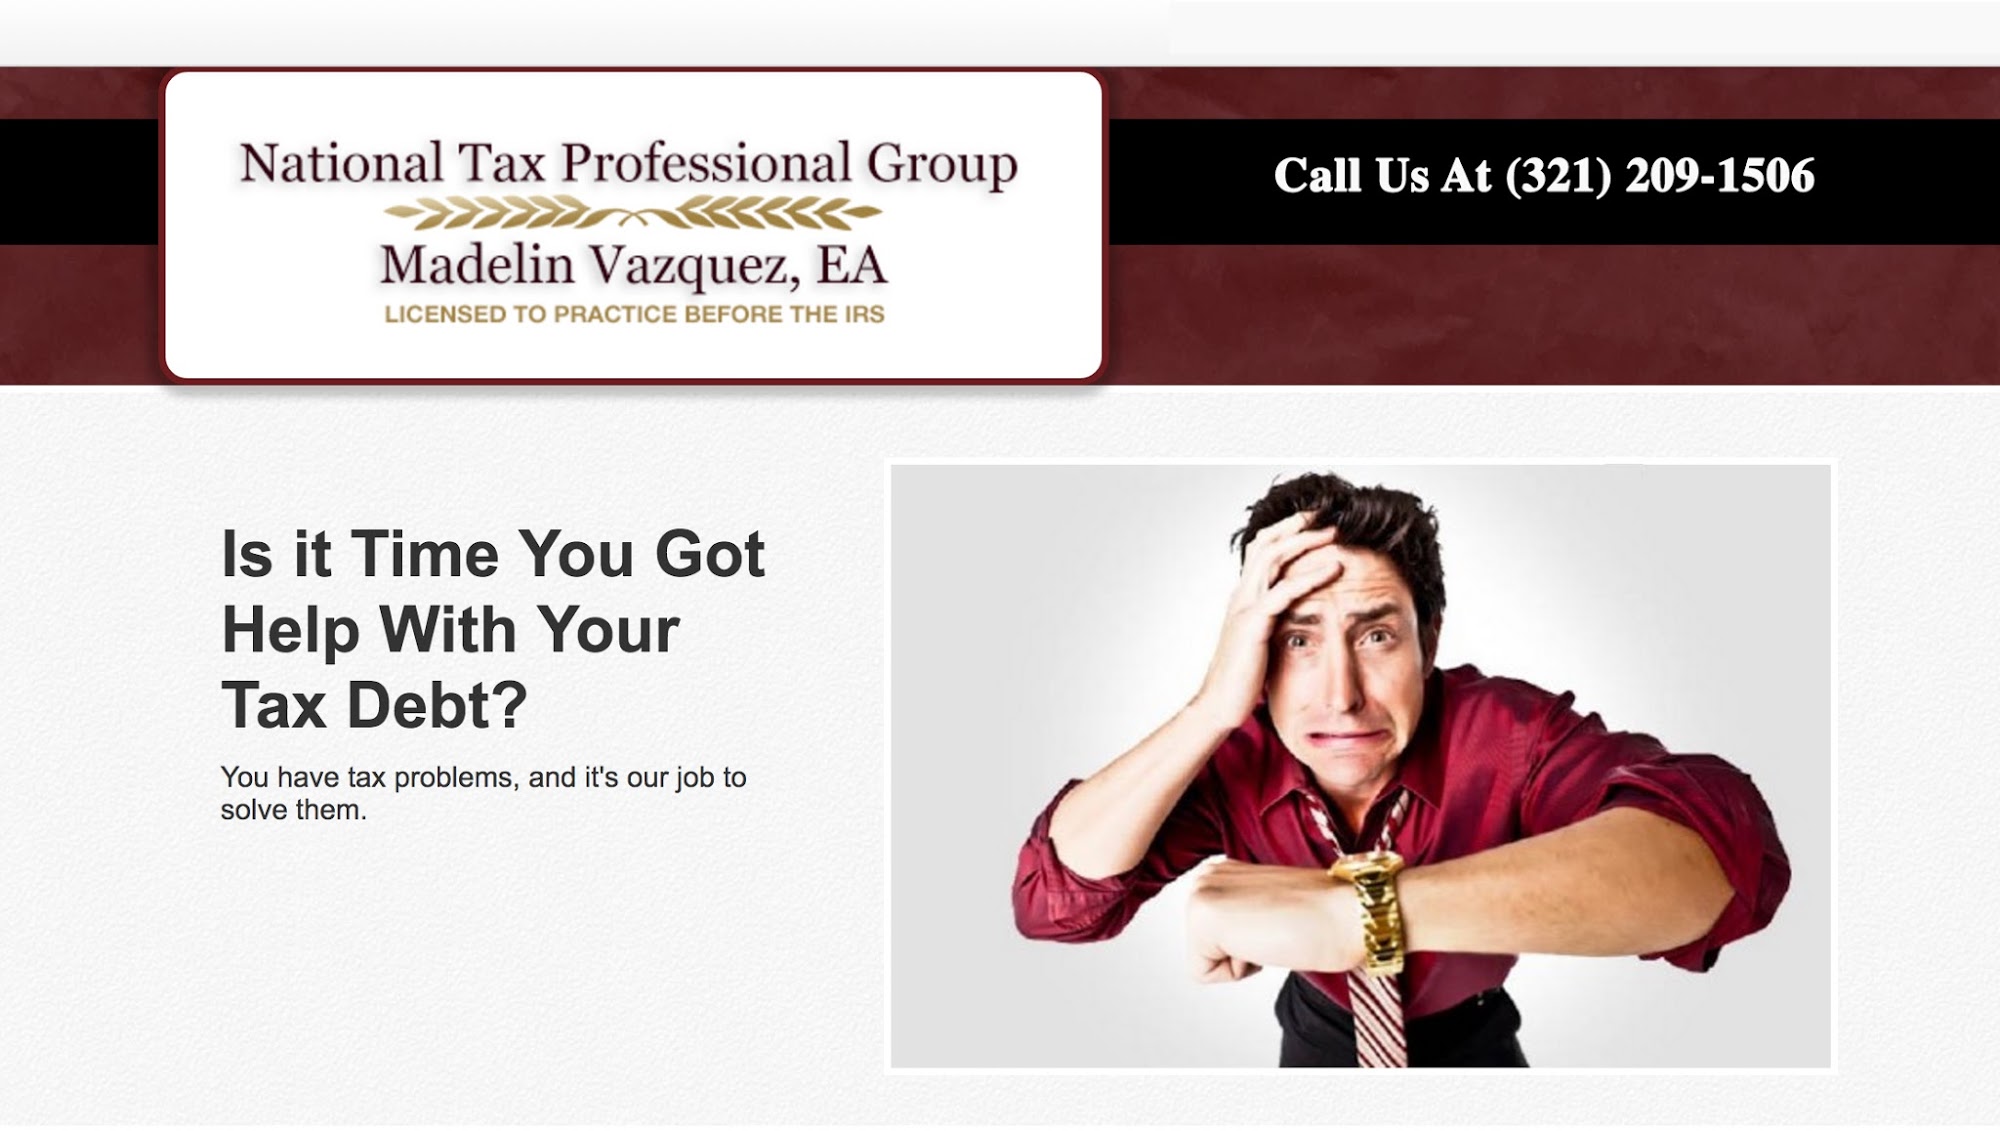 National Tax Professional Group